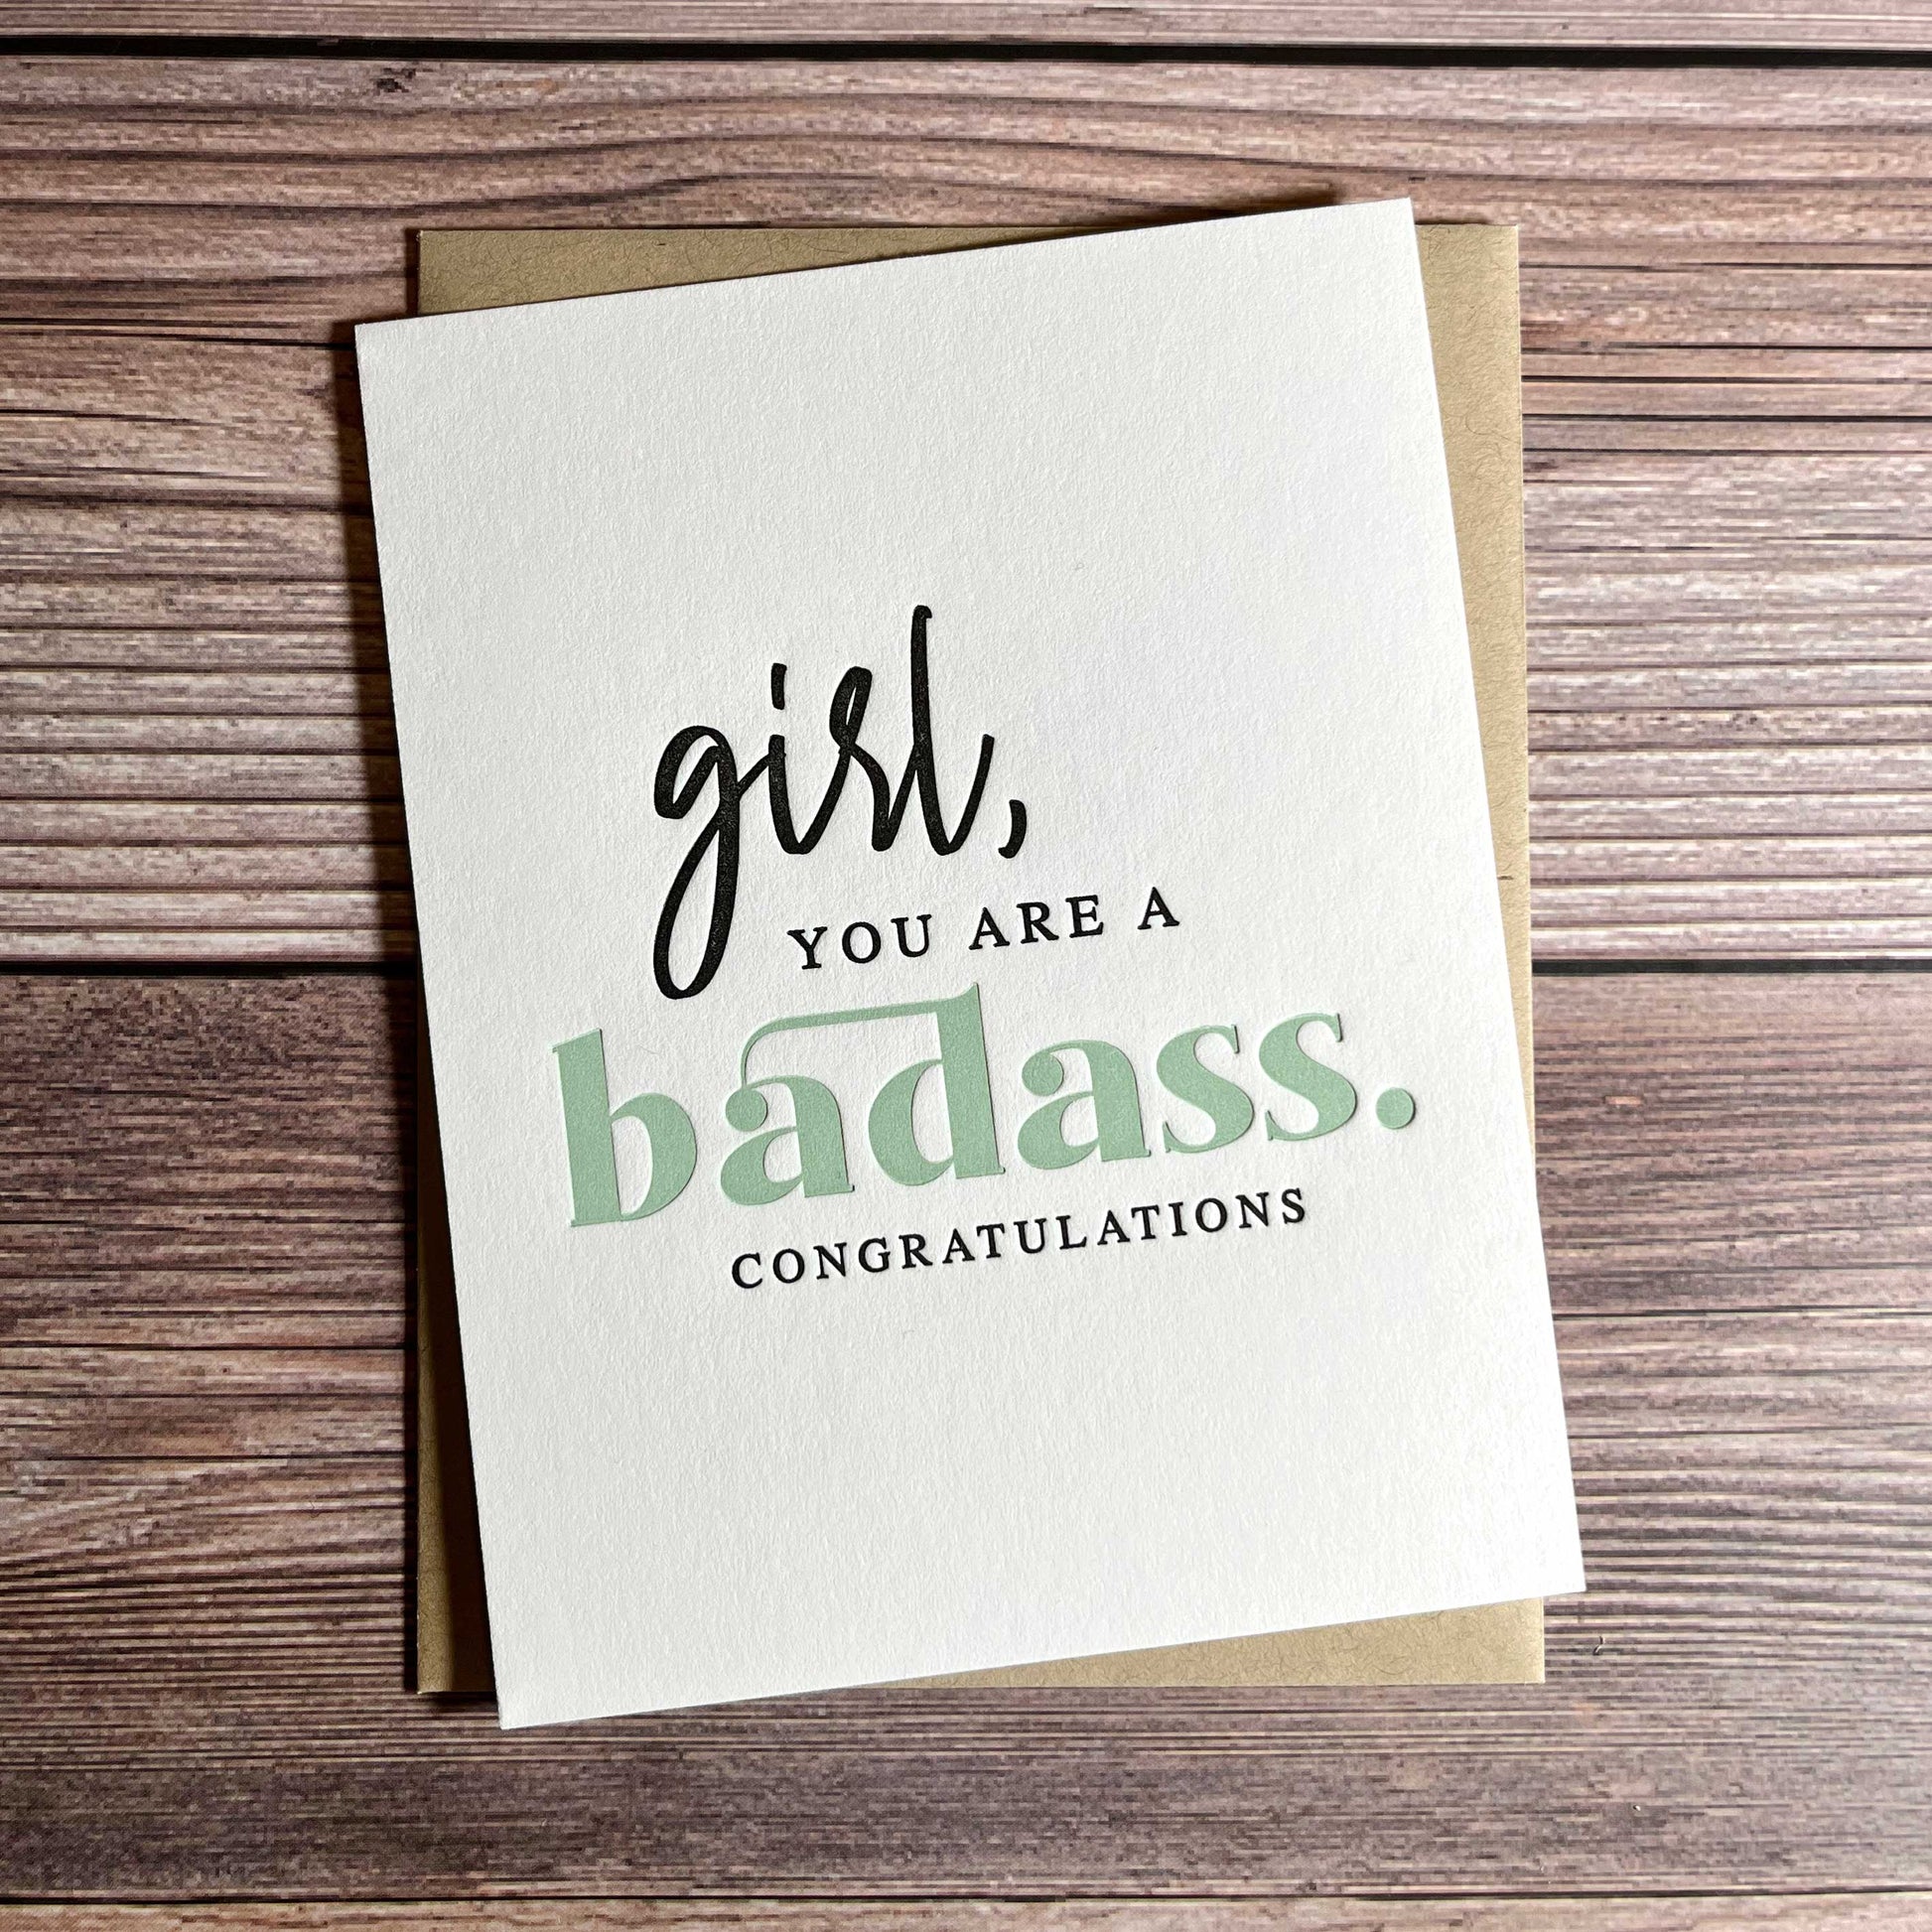 Girl, You are a badass. Congratulations. Badass Woman Greeting Card, Letterpress printed, includes envelope